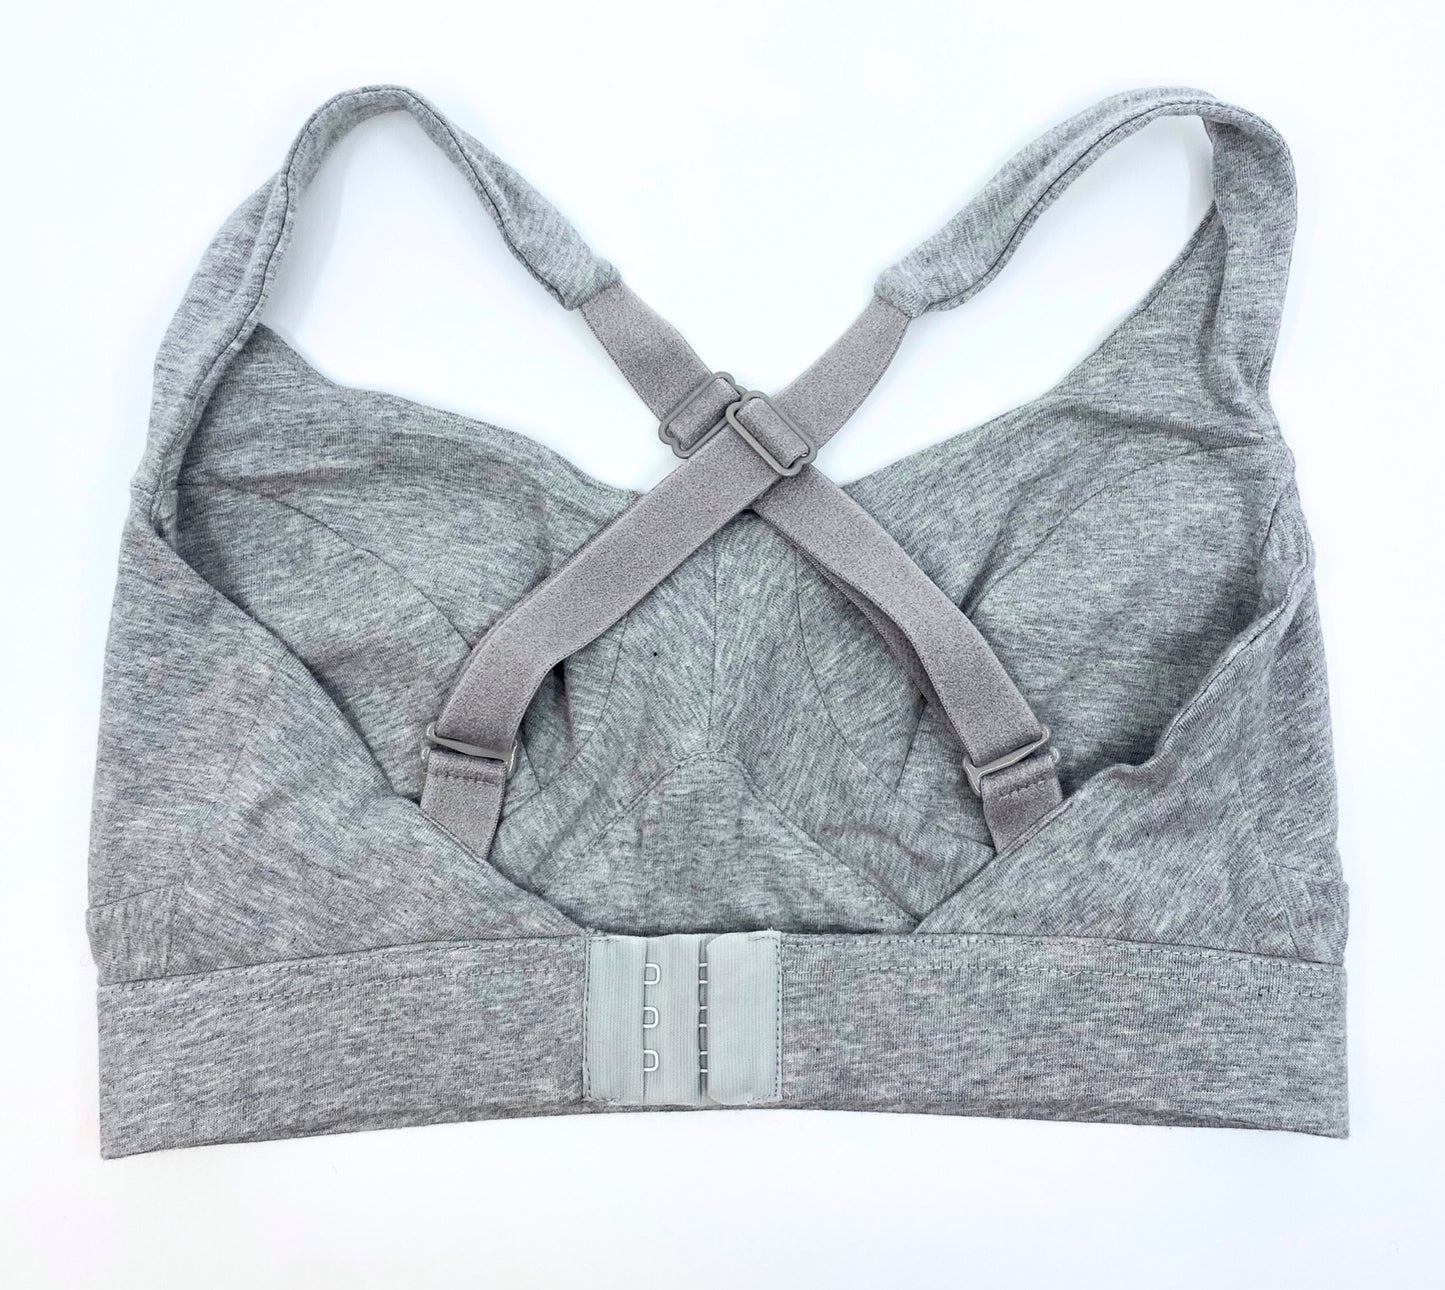 Women's organic cotton bra in light grey (heather grey) - more supportive style